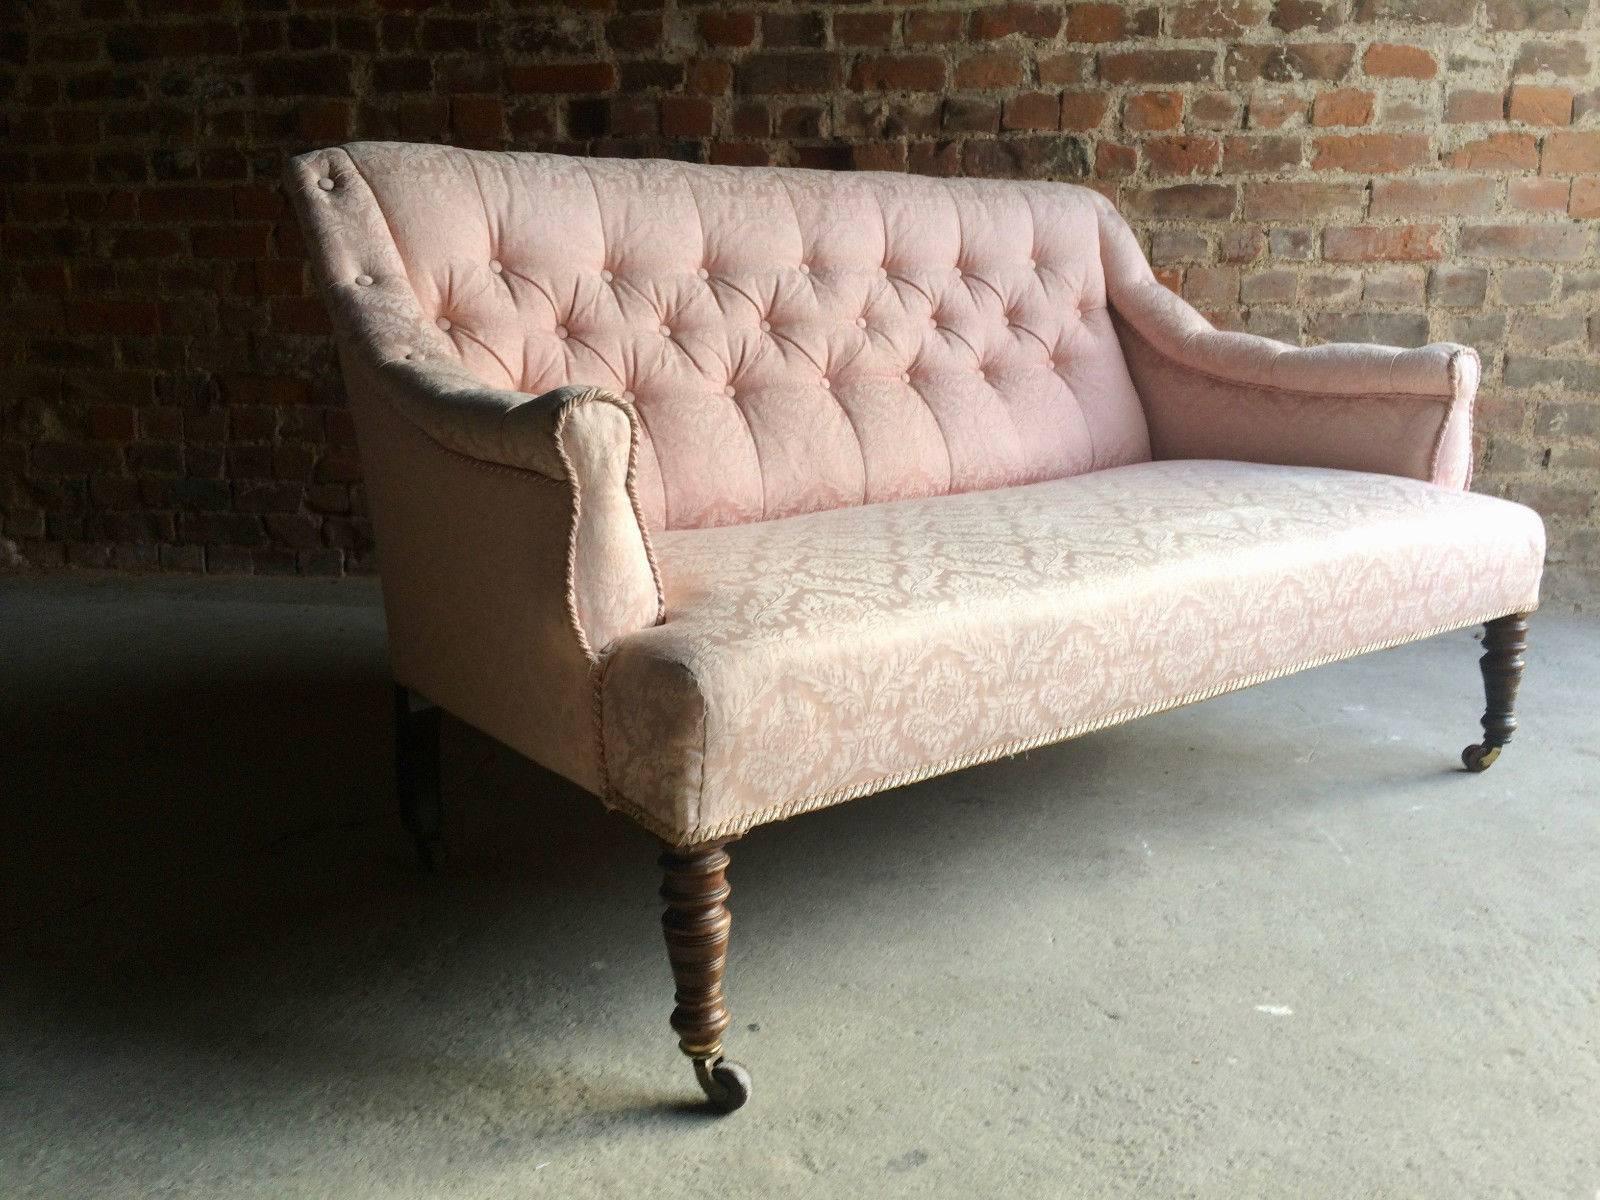 Antique Sofa Settee Chesterfield Button Back 19th Century Victorian Pink Casters 3